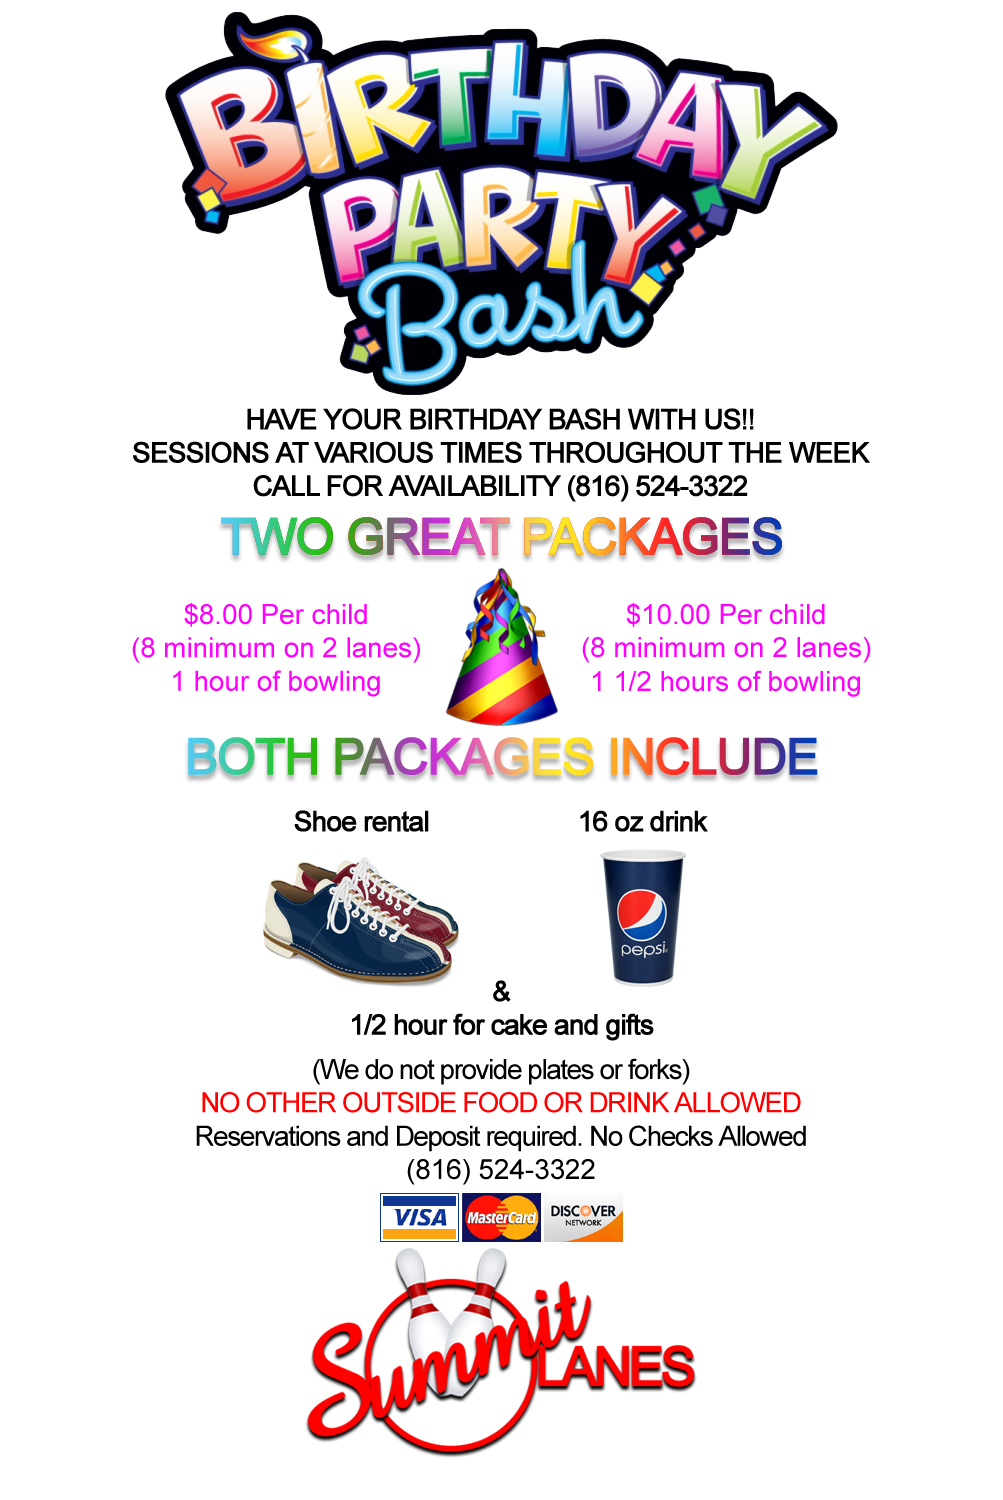 Have your Next Birthday Bash with us! Call for details.